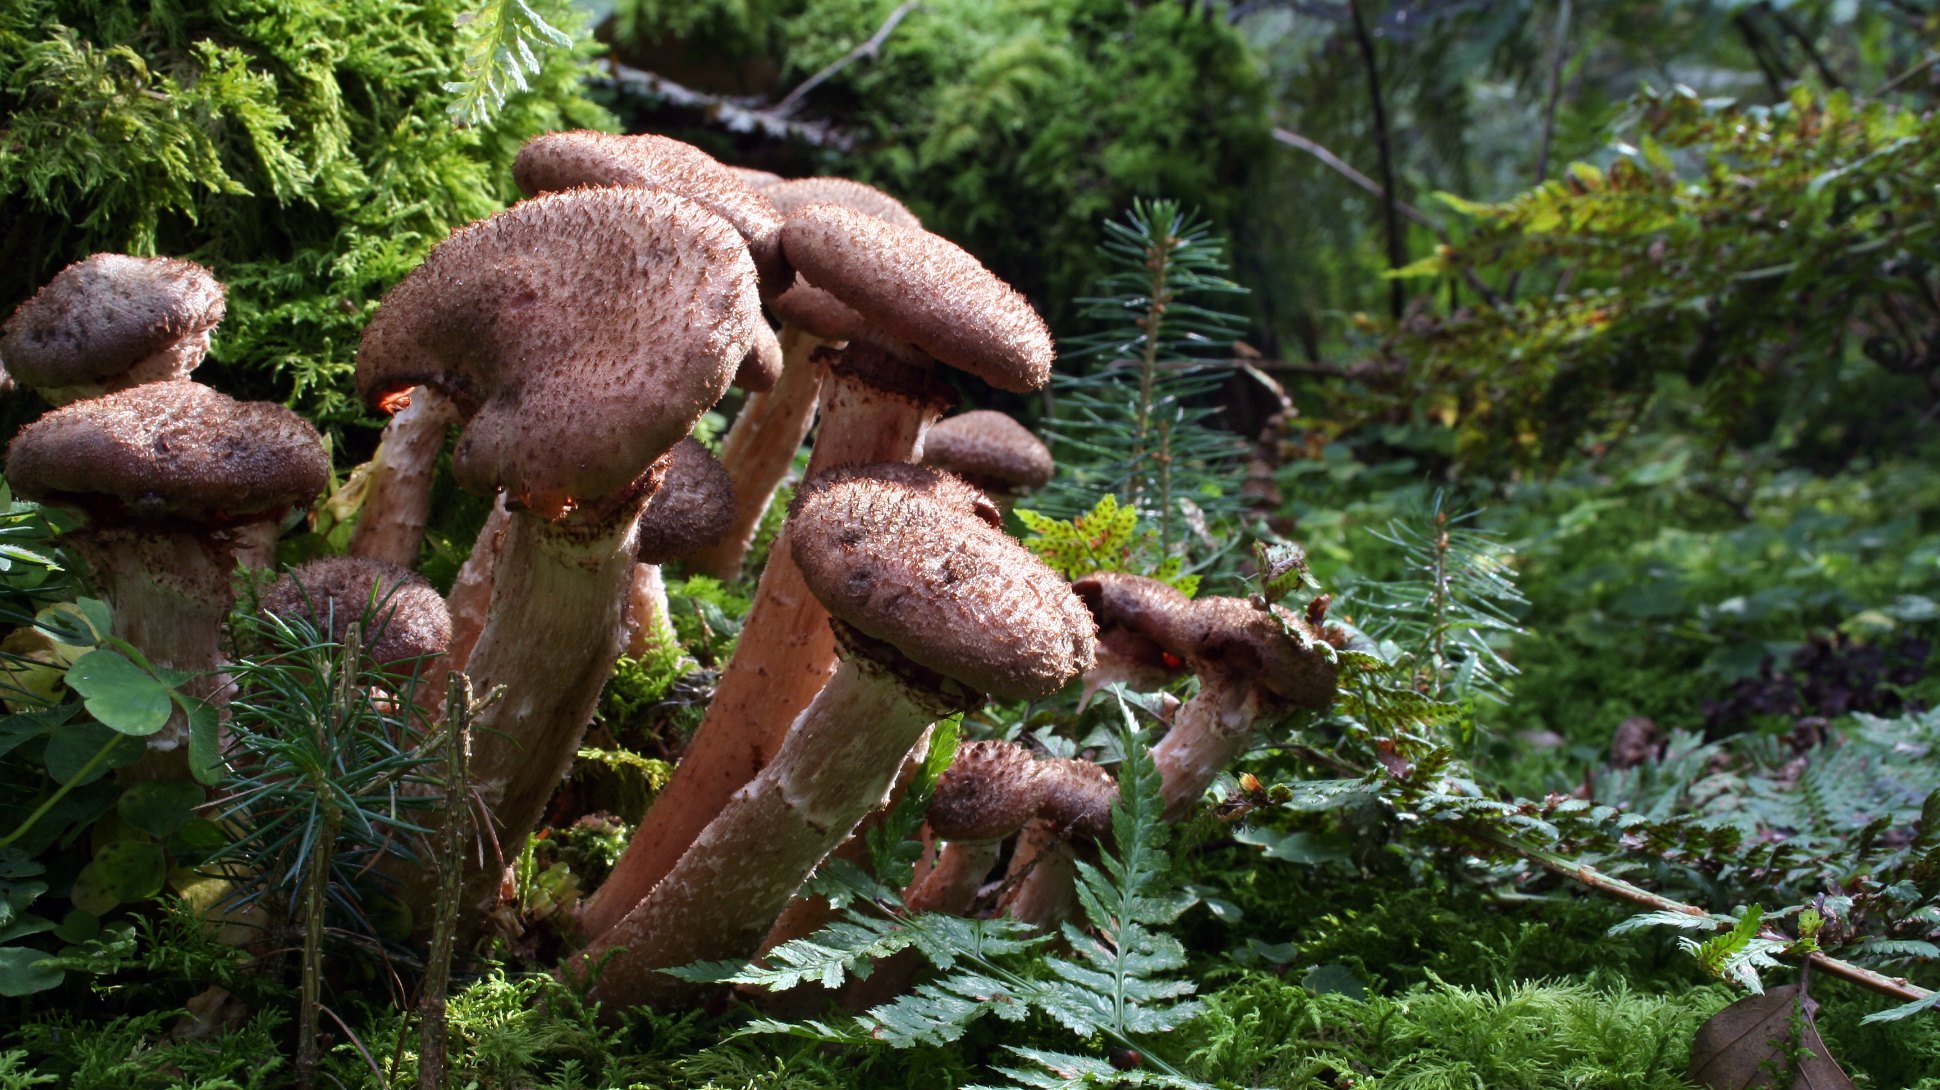 A brown cluster of mushrooms growing in a green forest dell